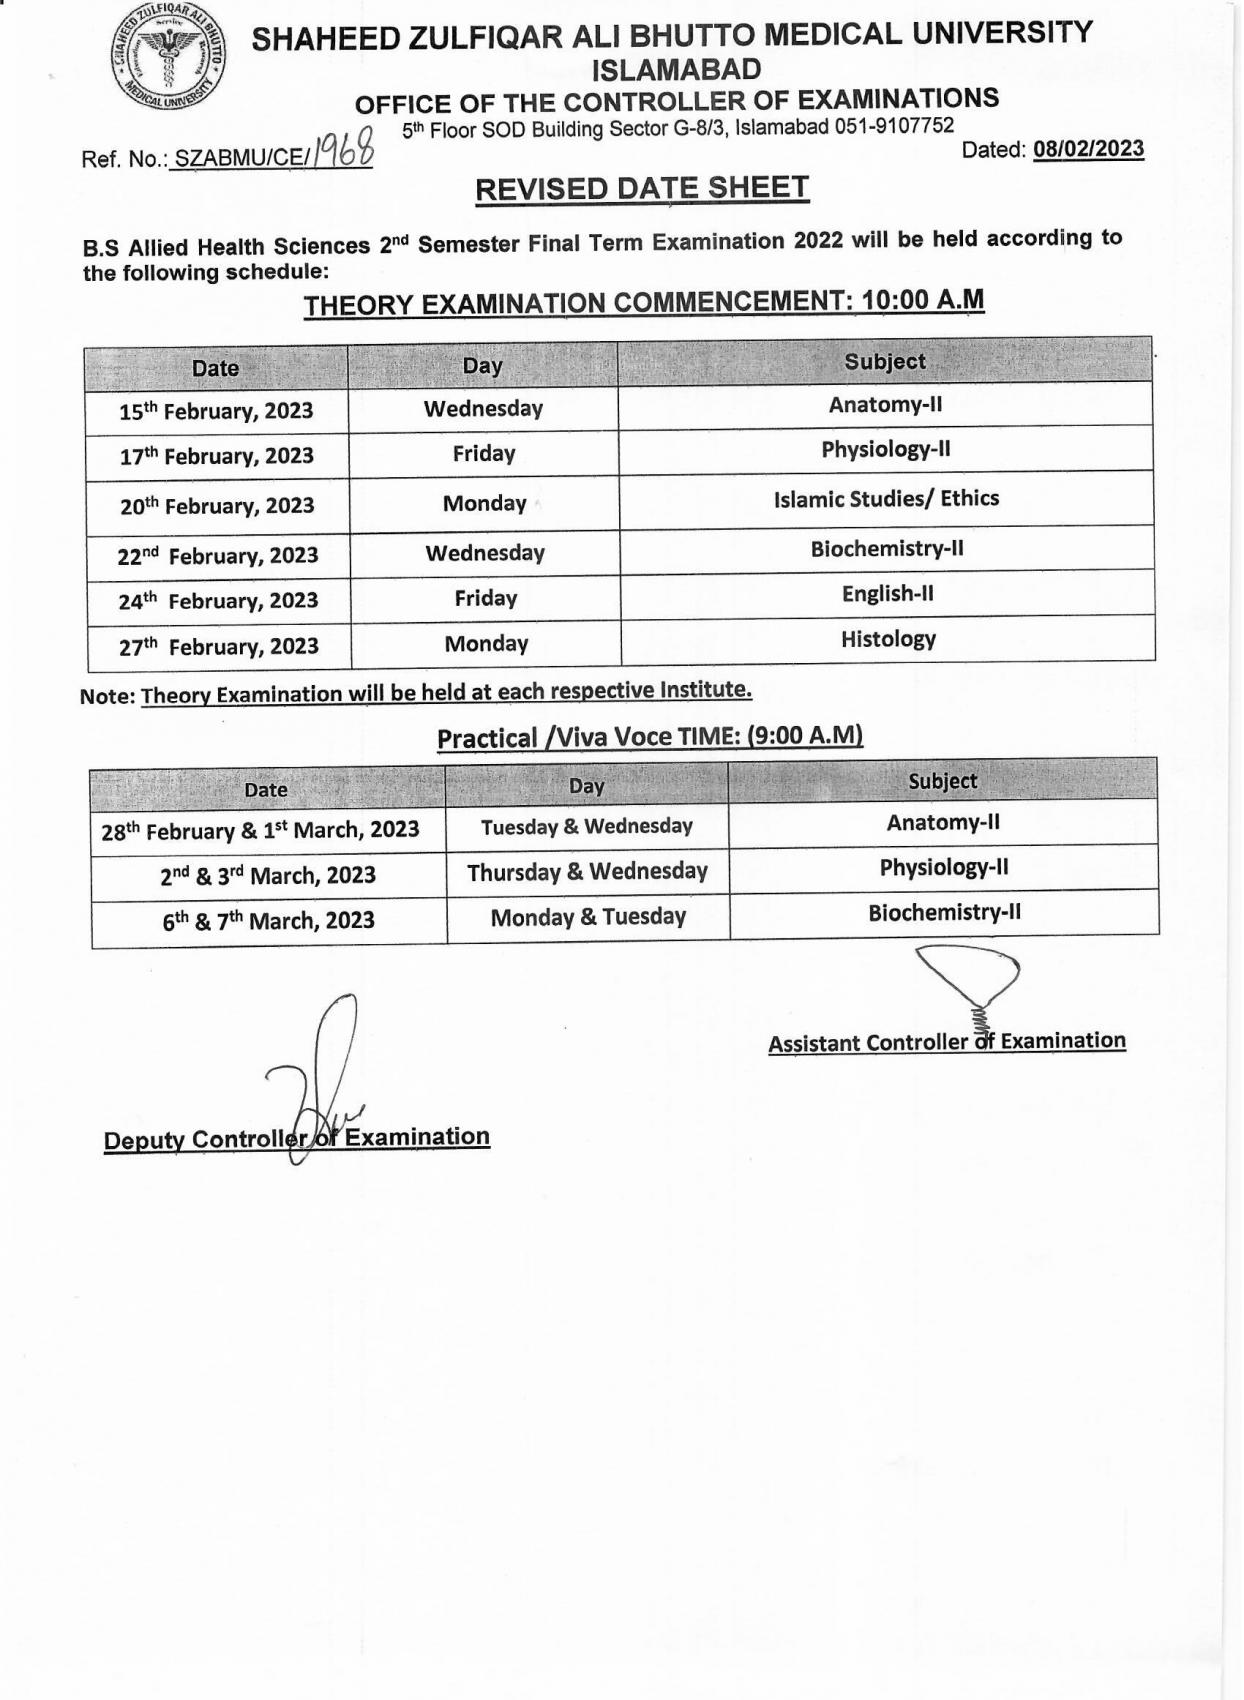 Revised Date Sheet - BS AHS Final Term Examination 2022